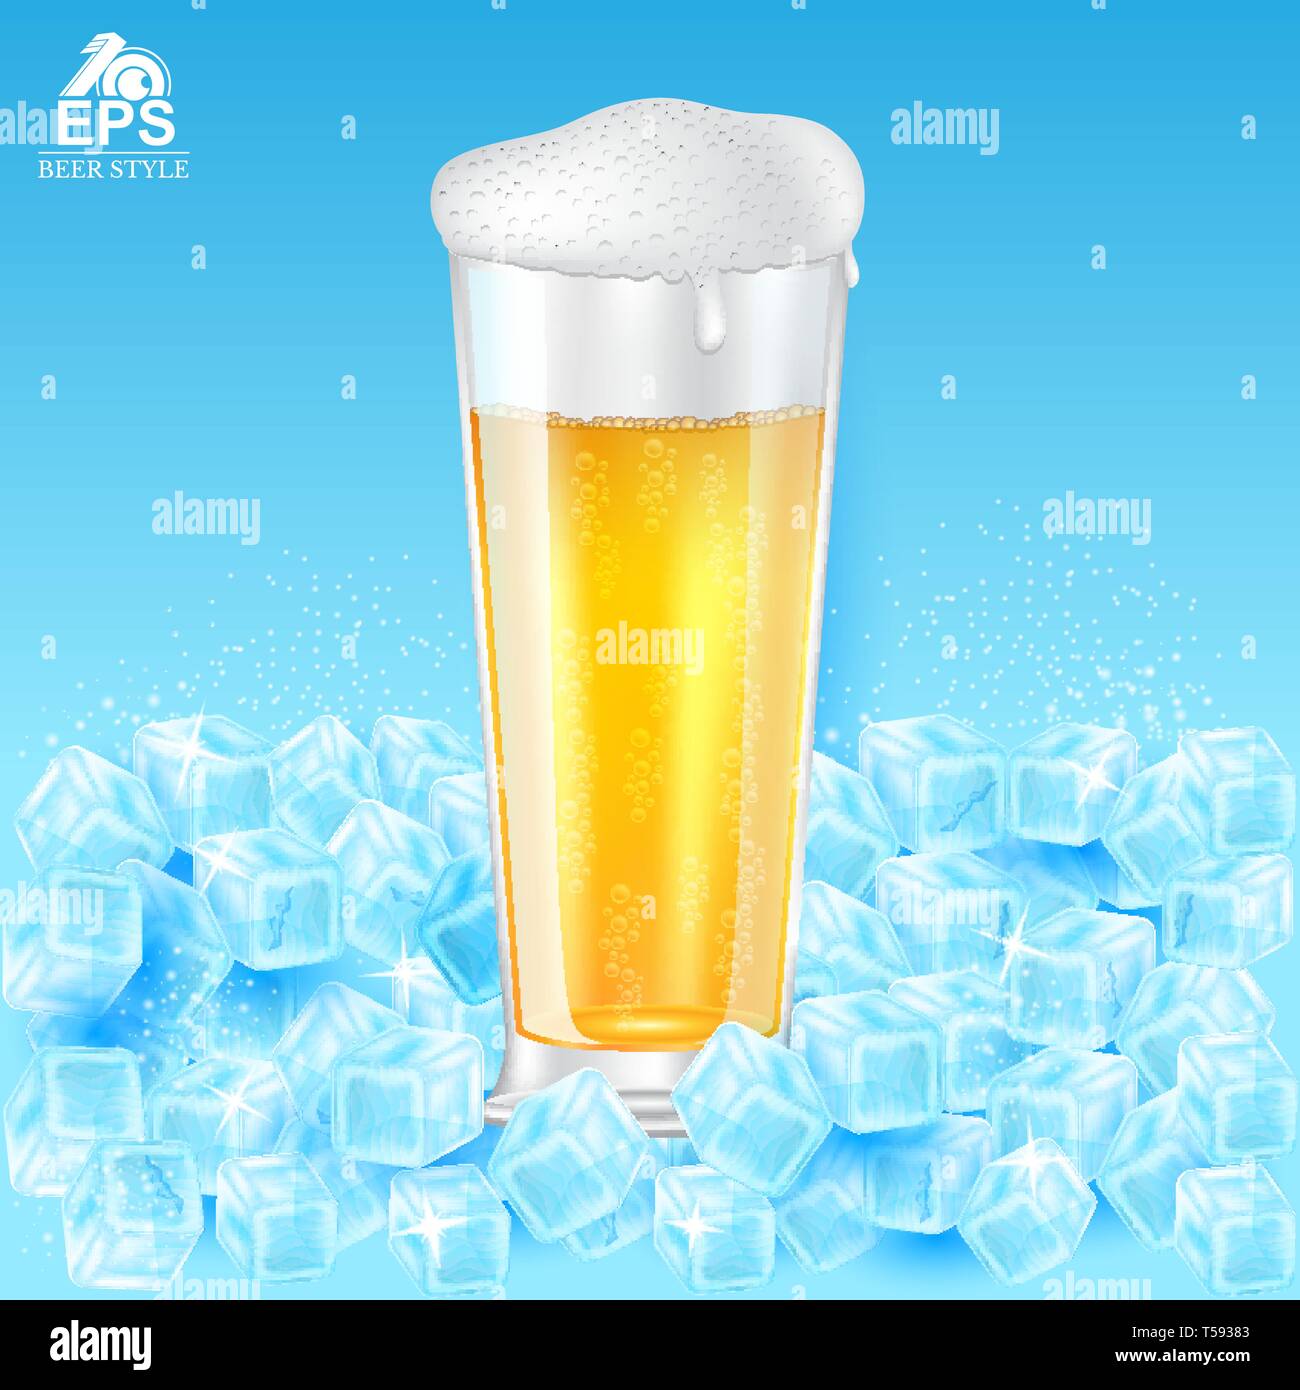 Realistic mock up glass of beer with foam among ice cubes on blue background Stock Vector